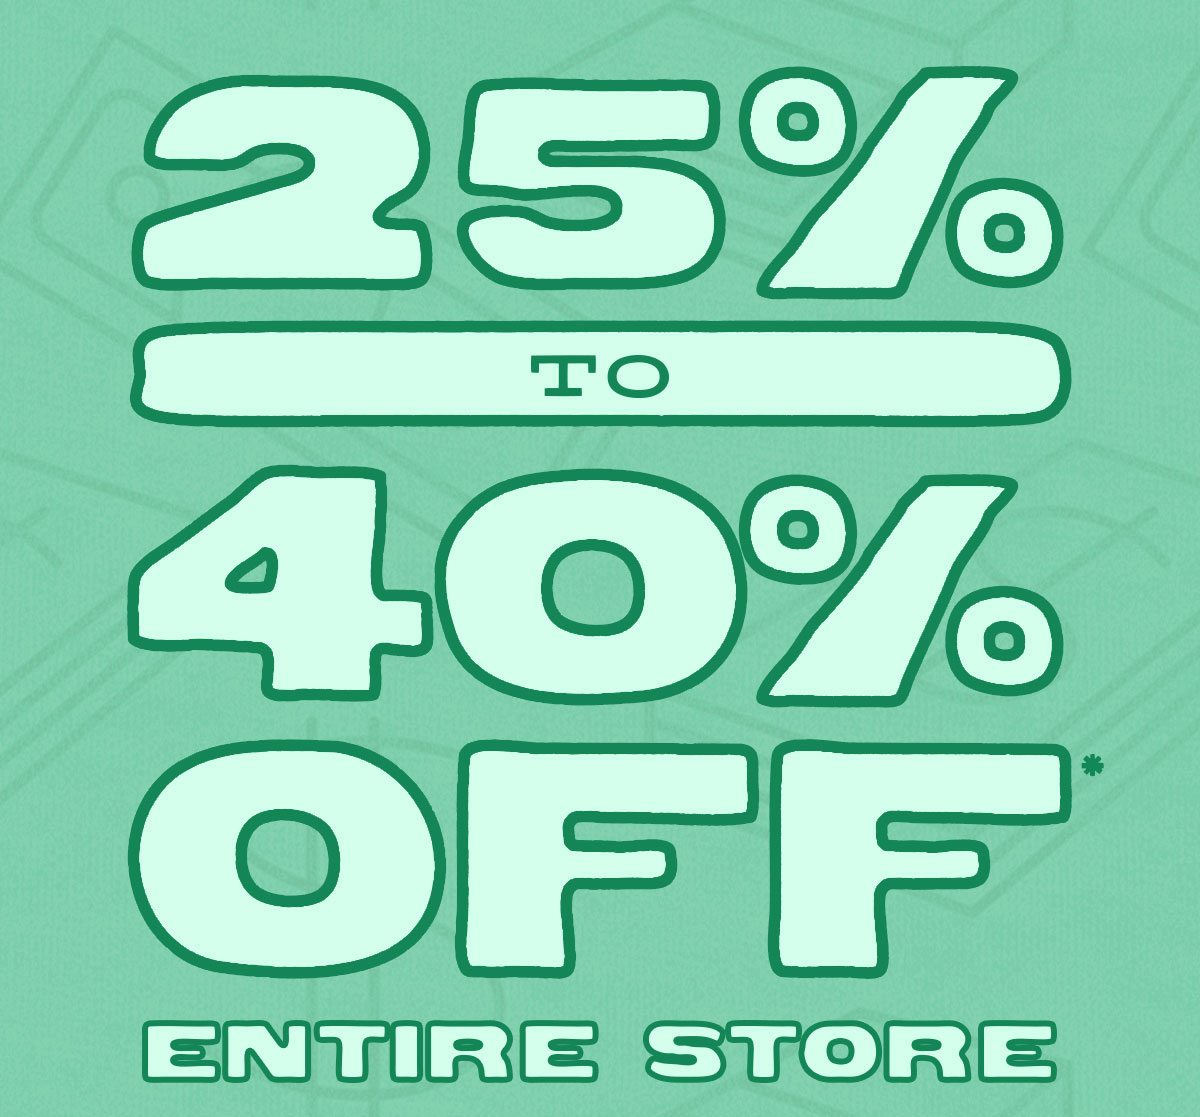 25-40% off entire store. Today only.